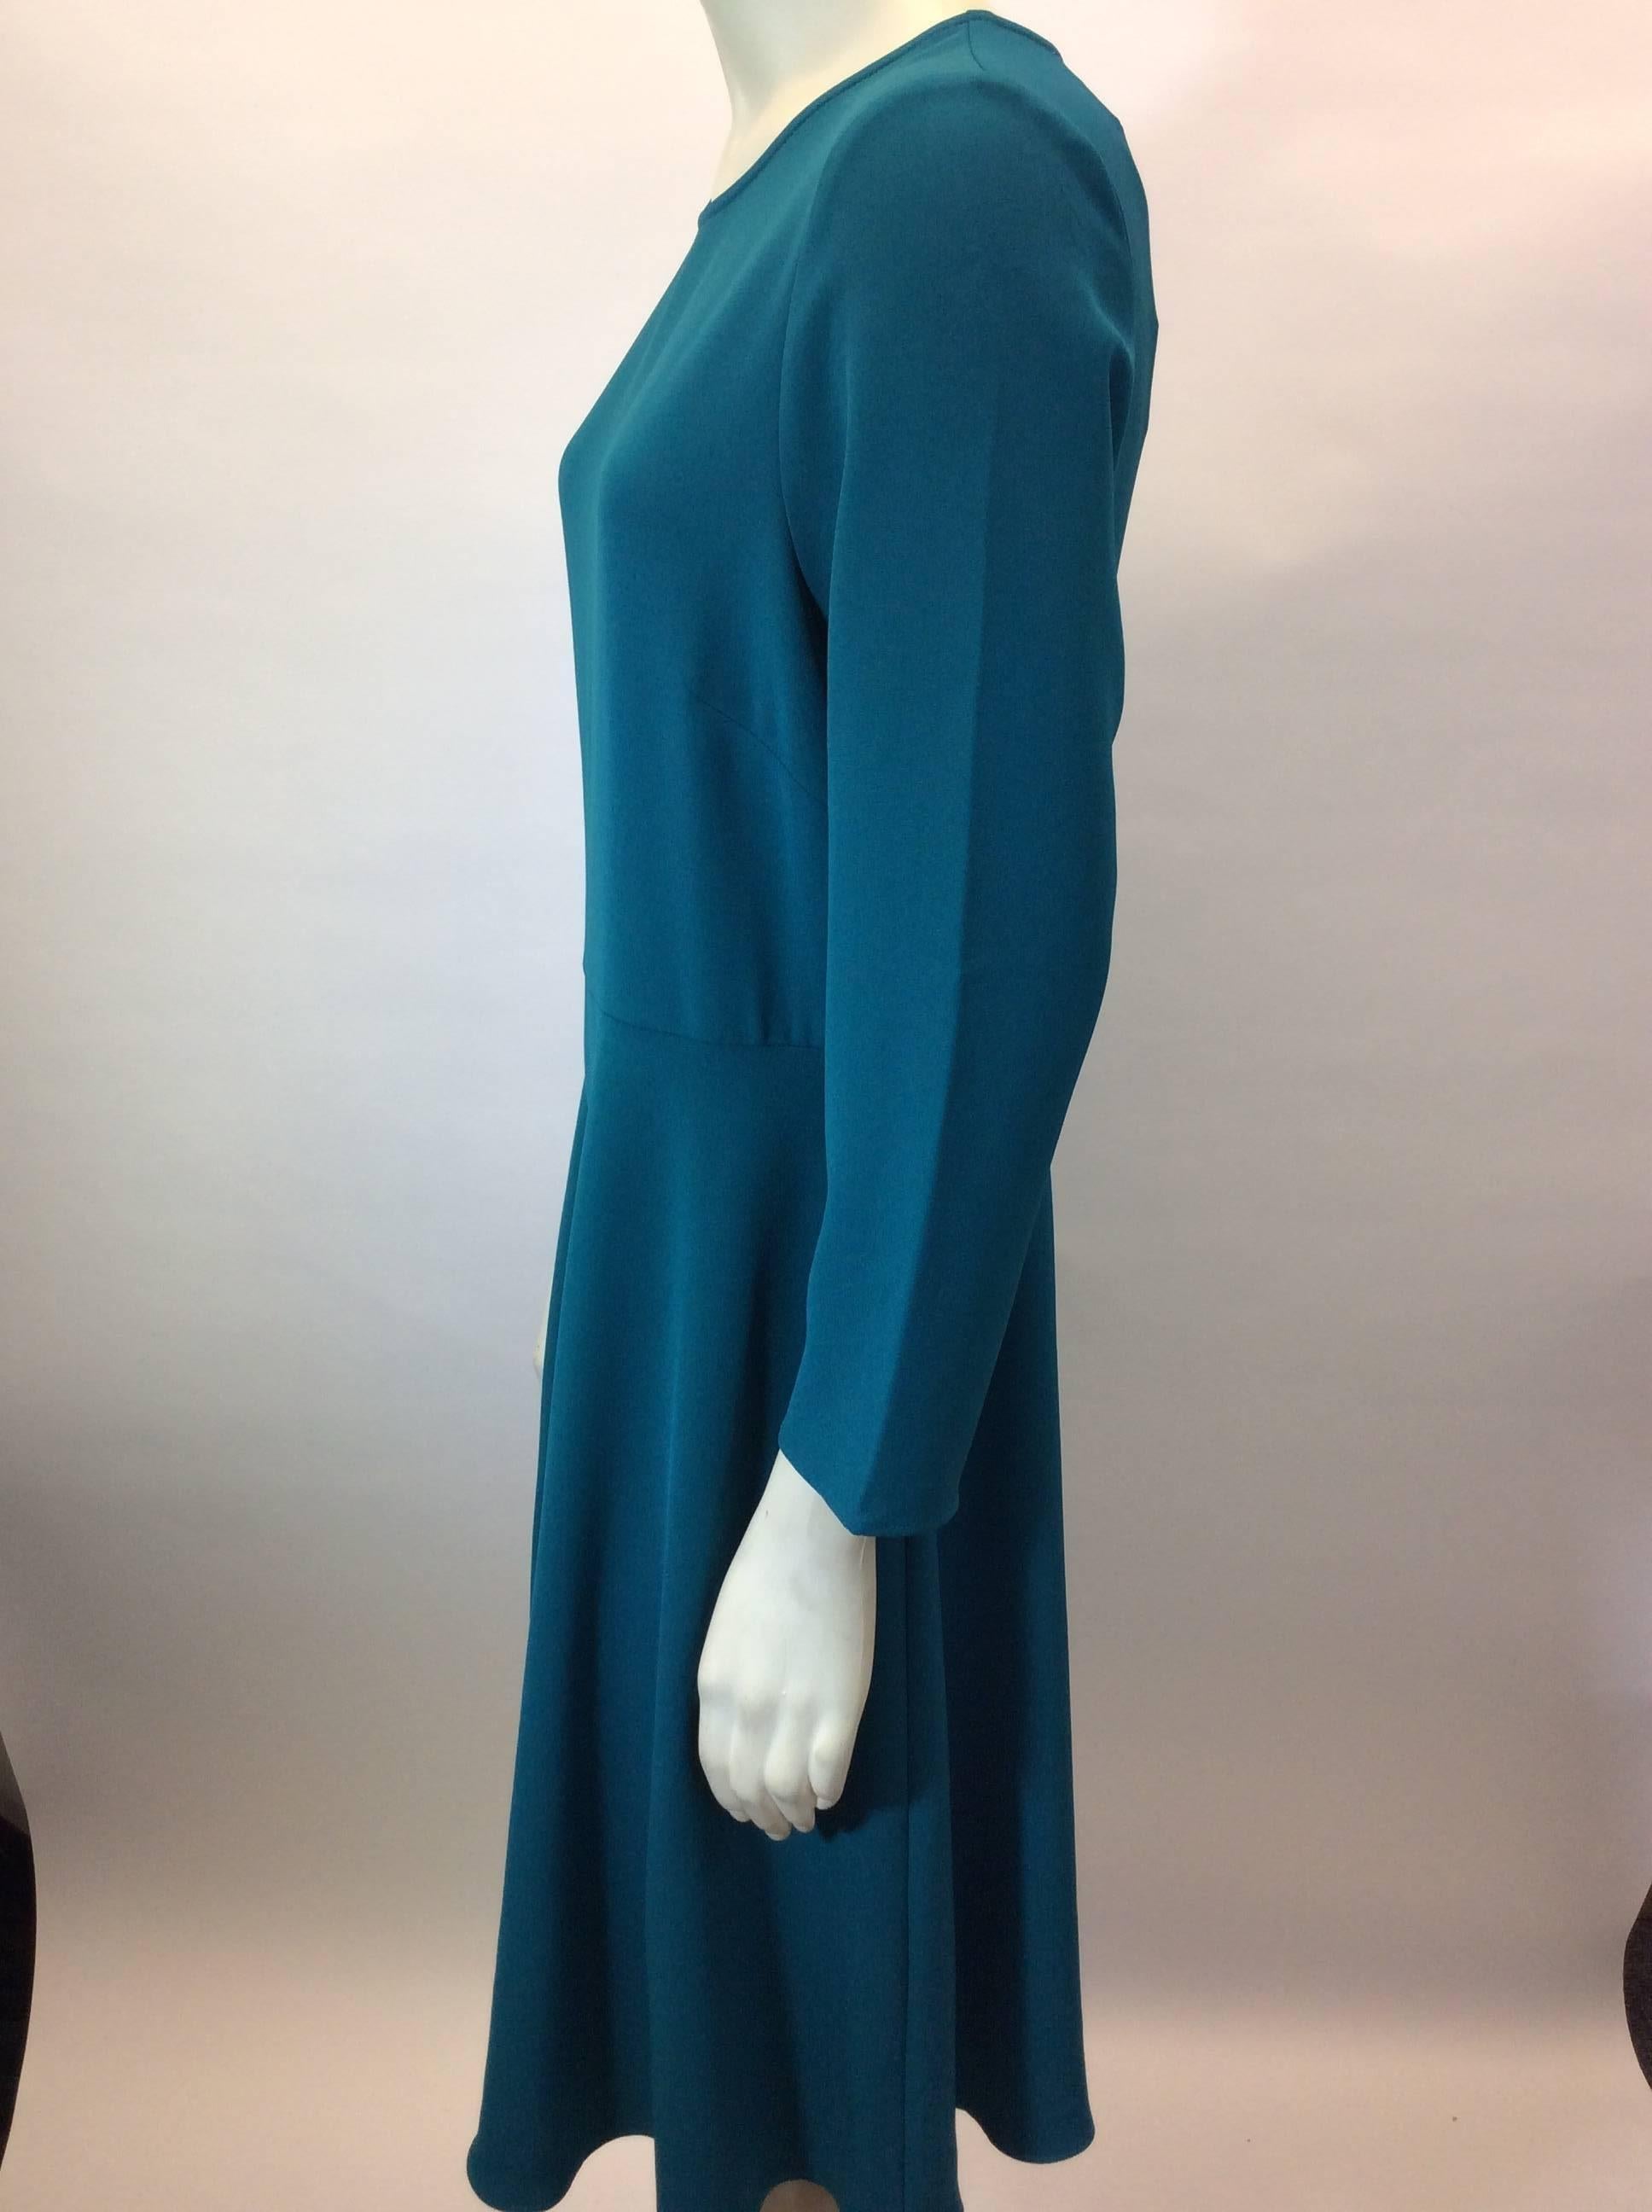 Blue Parosh Teal Skater Style Dress with 3/4 Sleeves For Sale